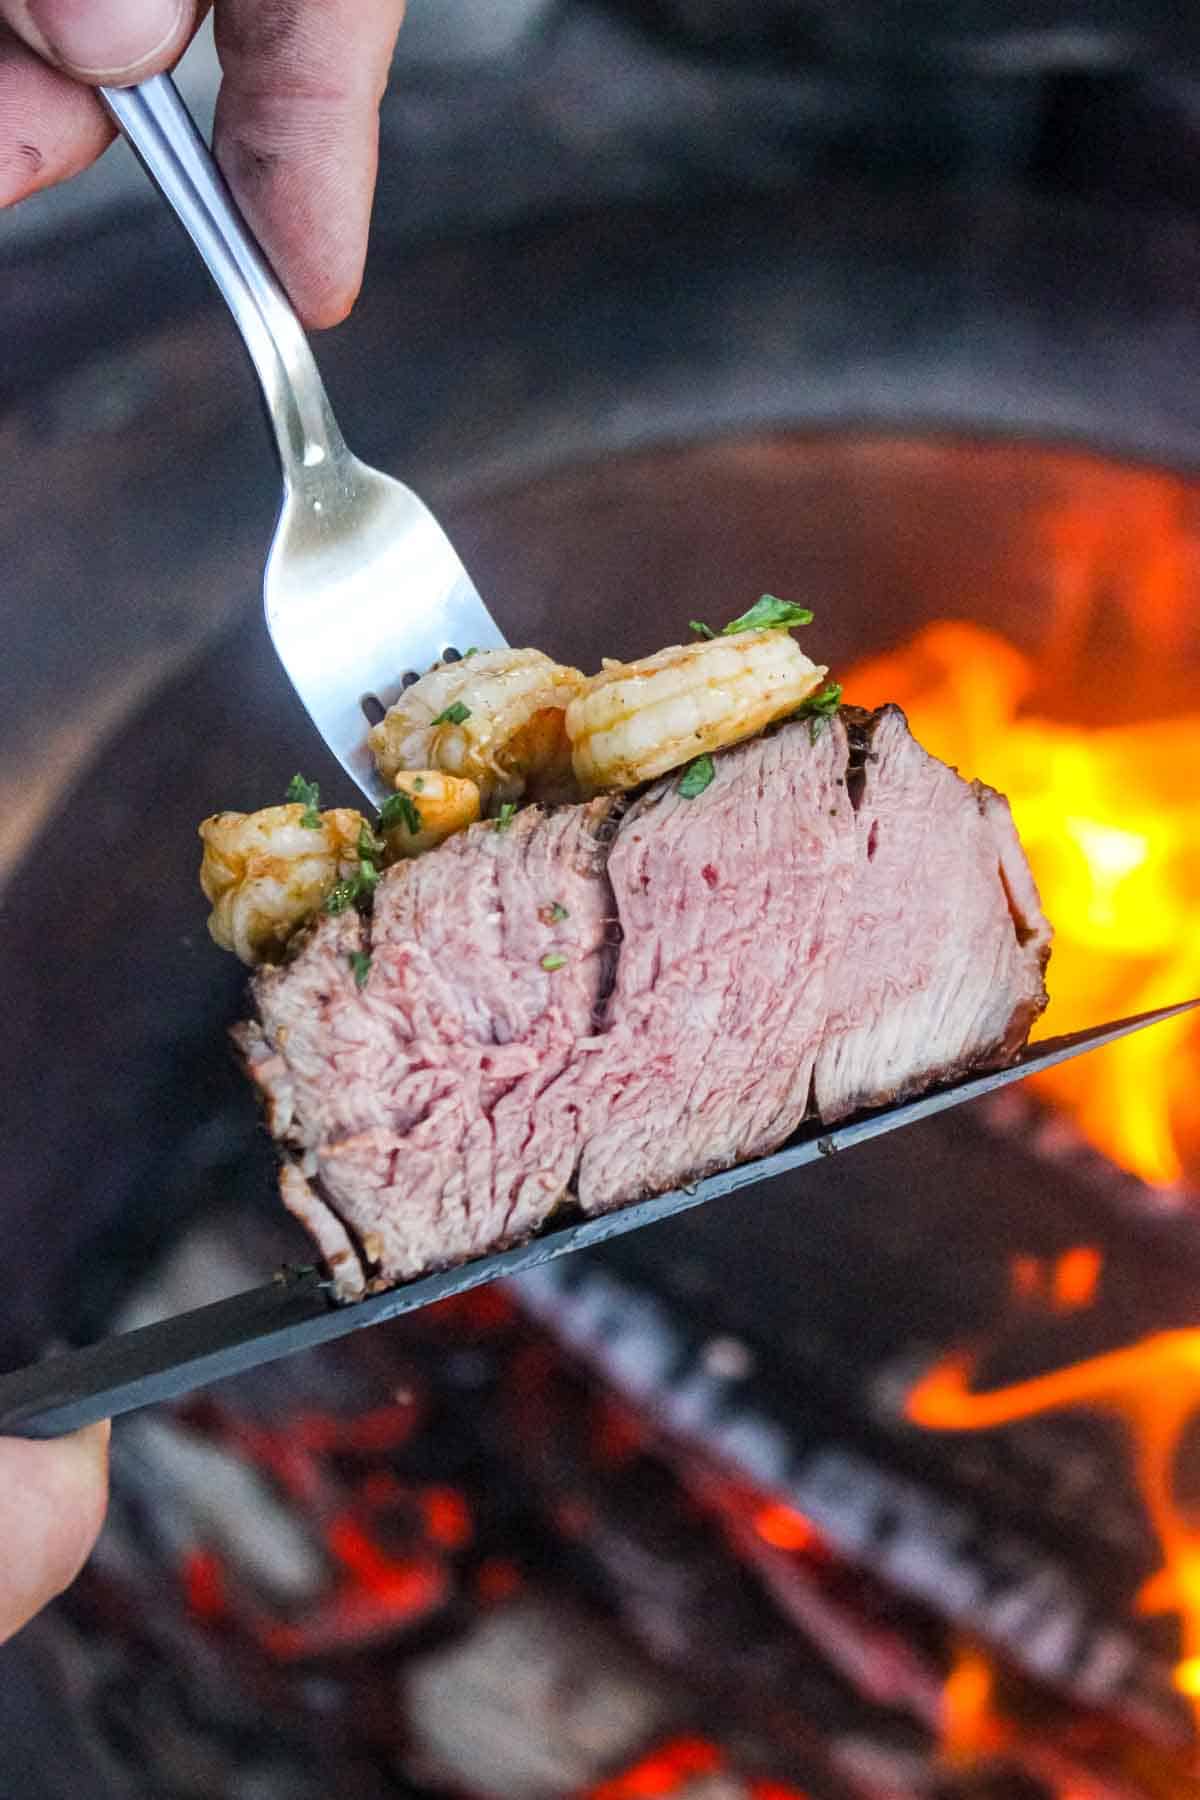 A close up shot of a sliced filet mignon with the garlic shrimp on top.